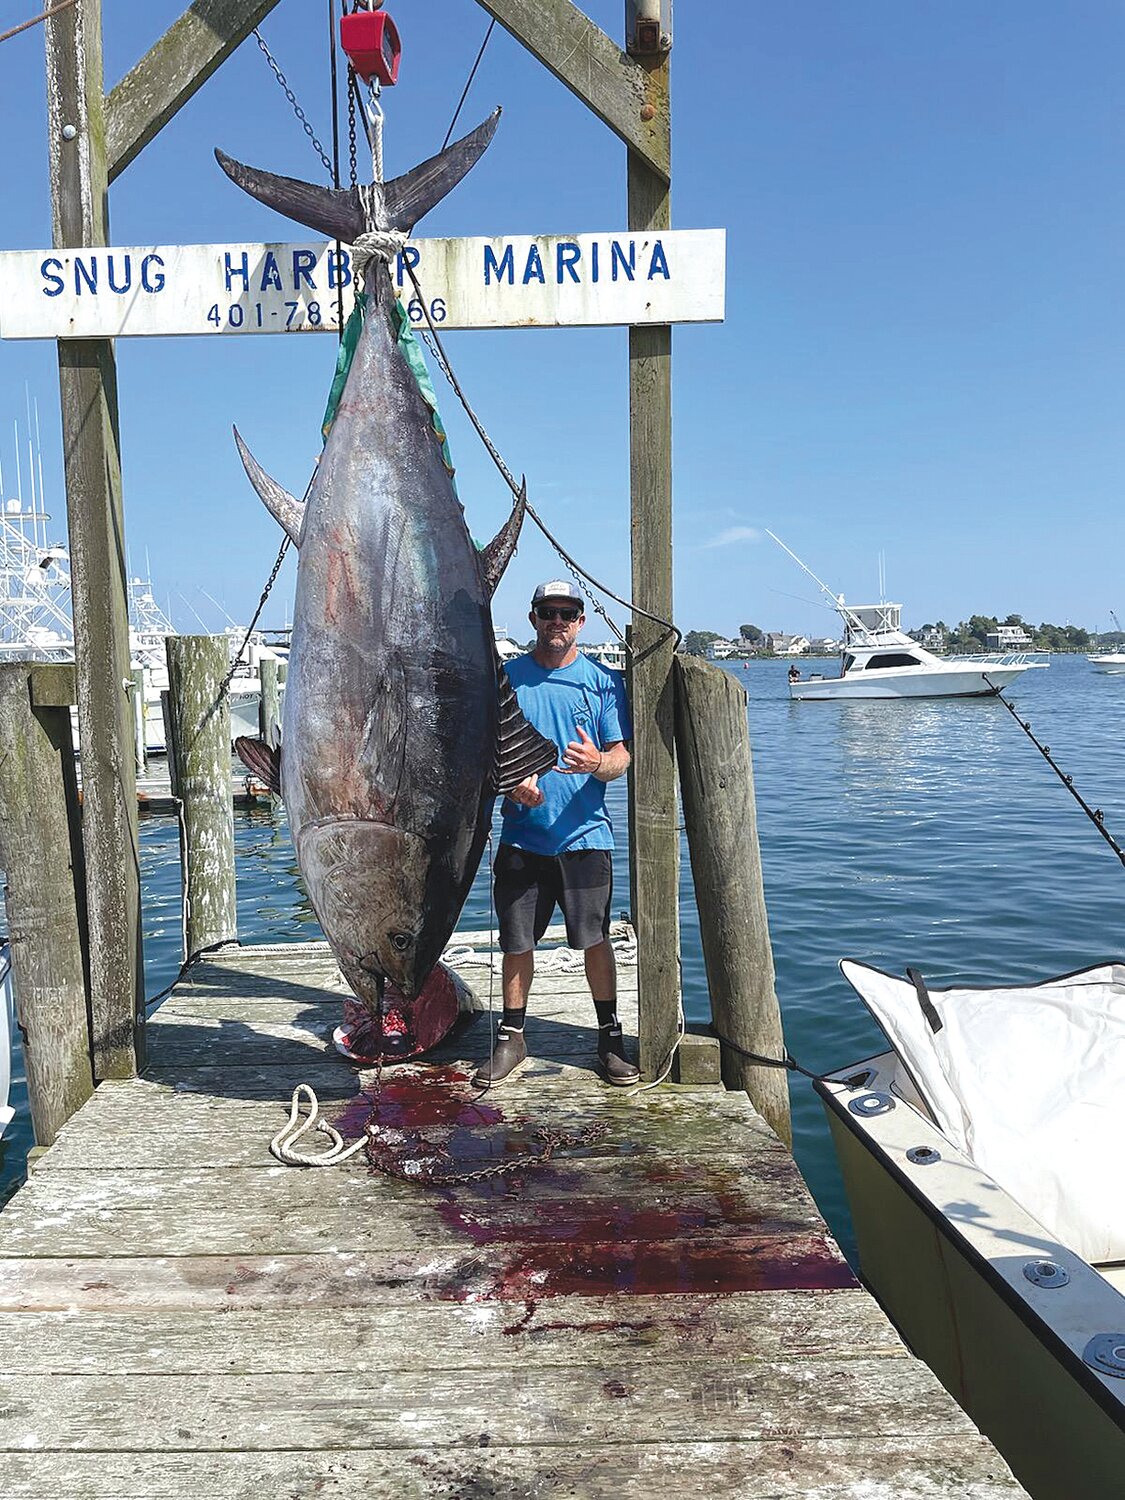 Nick Papa of South Kingstown, captain of the vessel Ruthless, took first place in the Boston Bluefin Classic with this 788-pound giant bluefin tuna caught off Scarborough Beach, R.I.